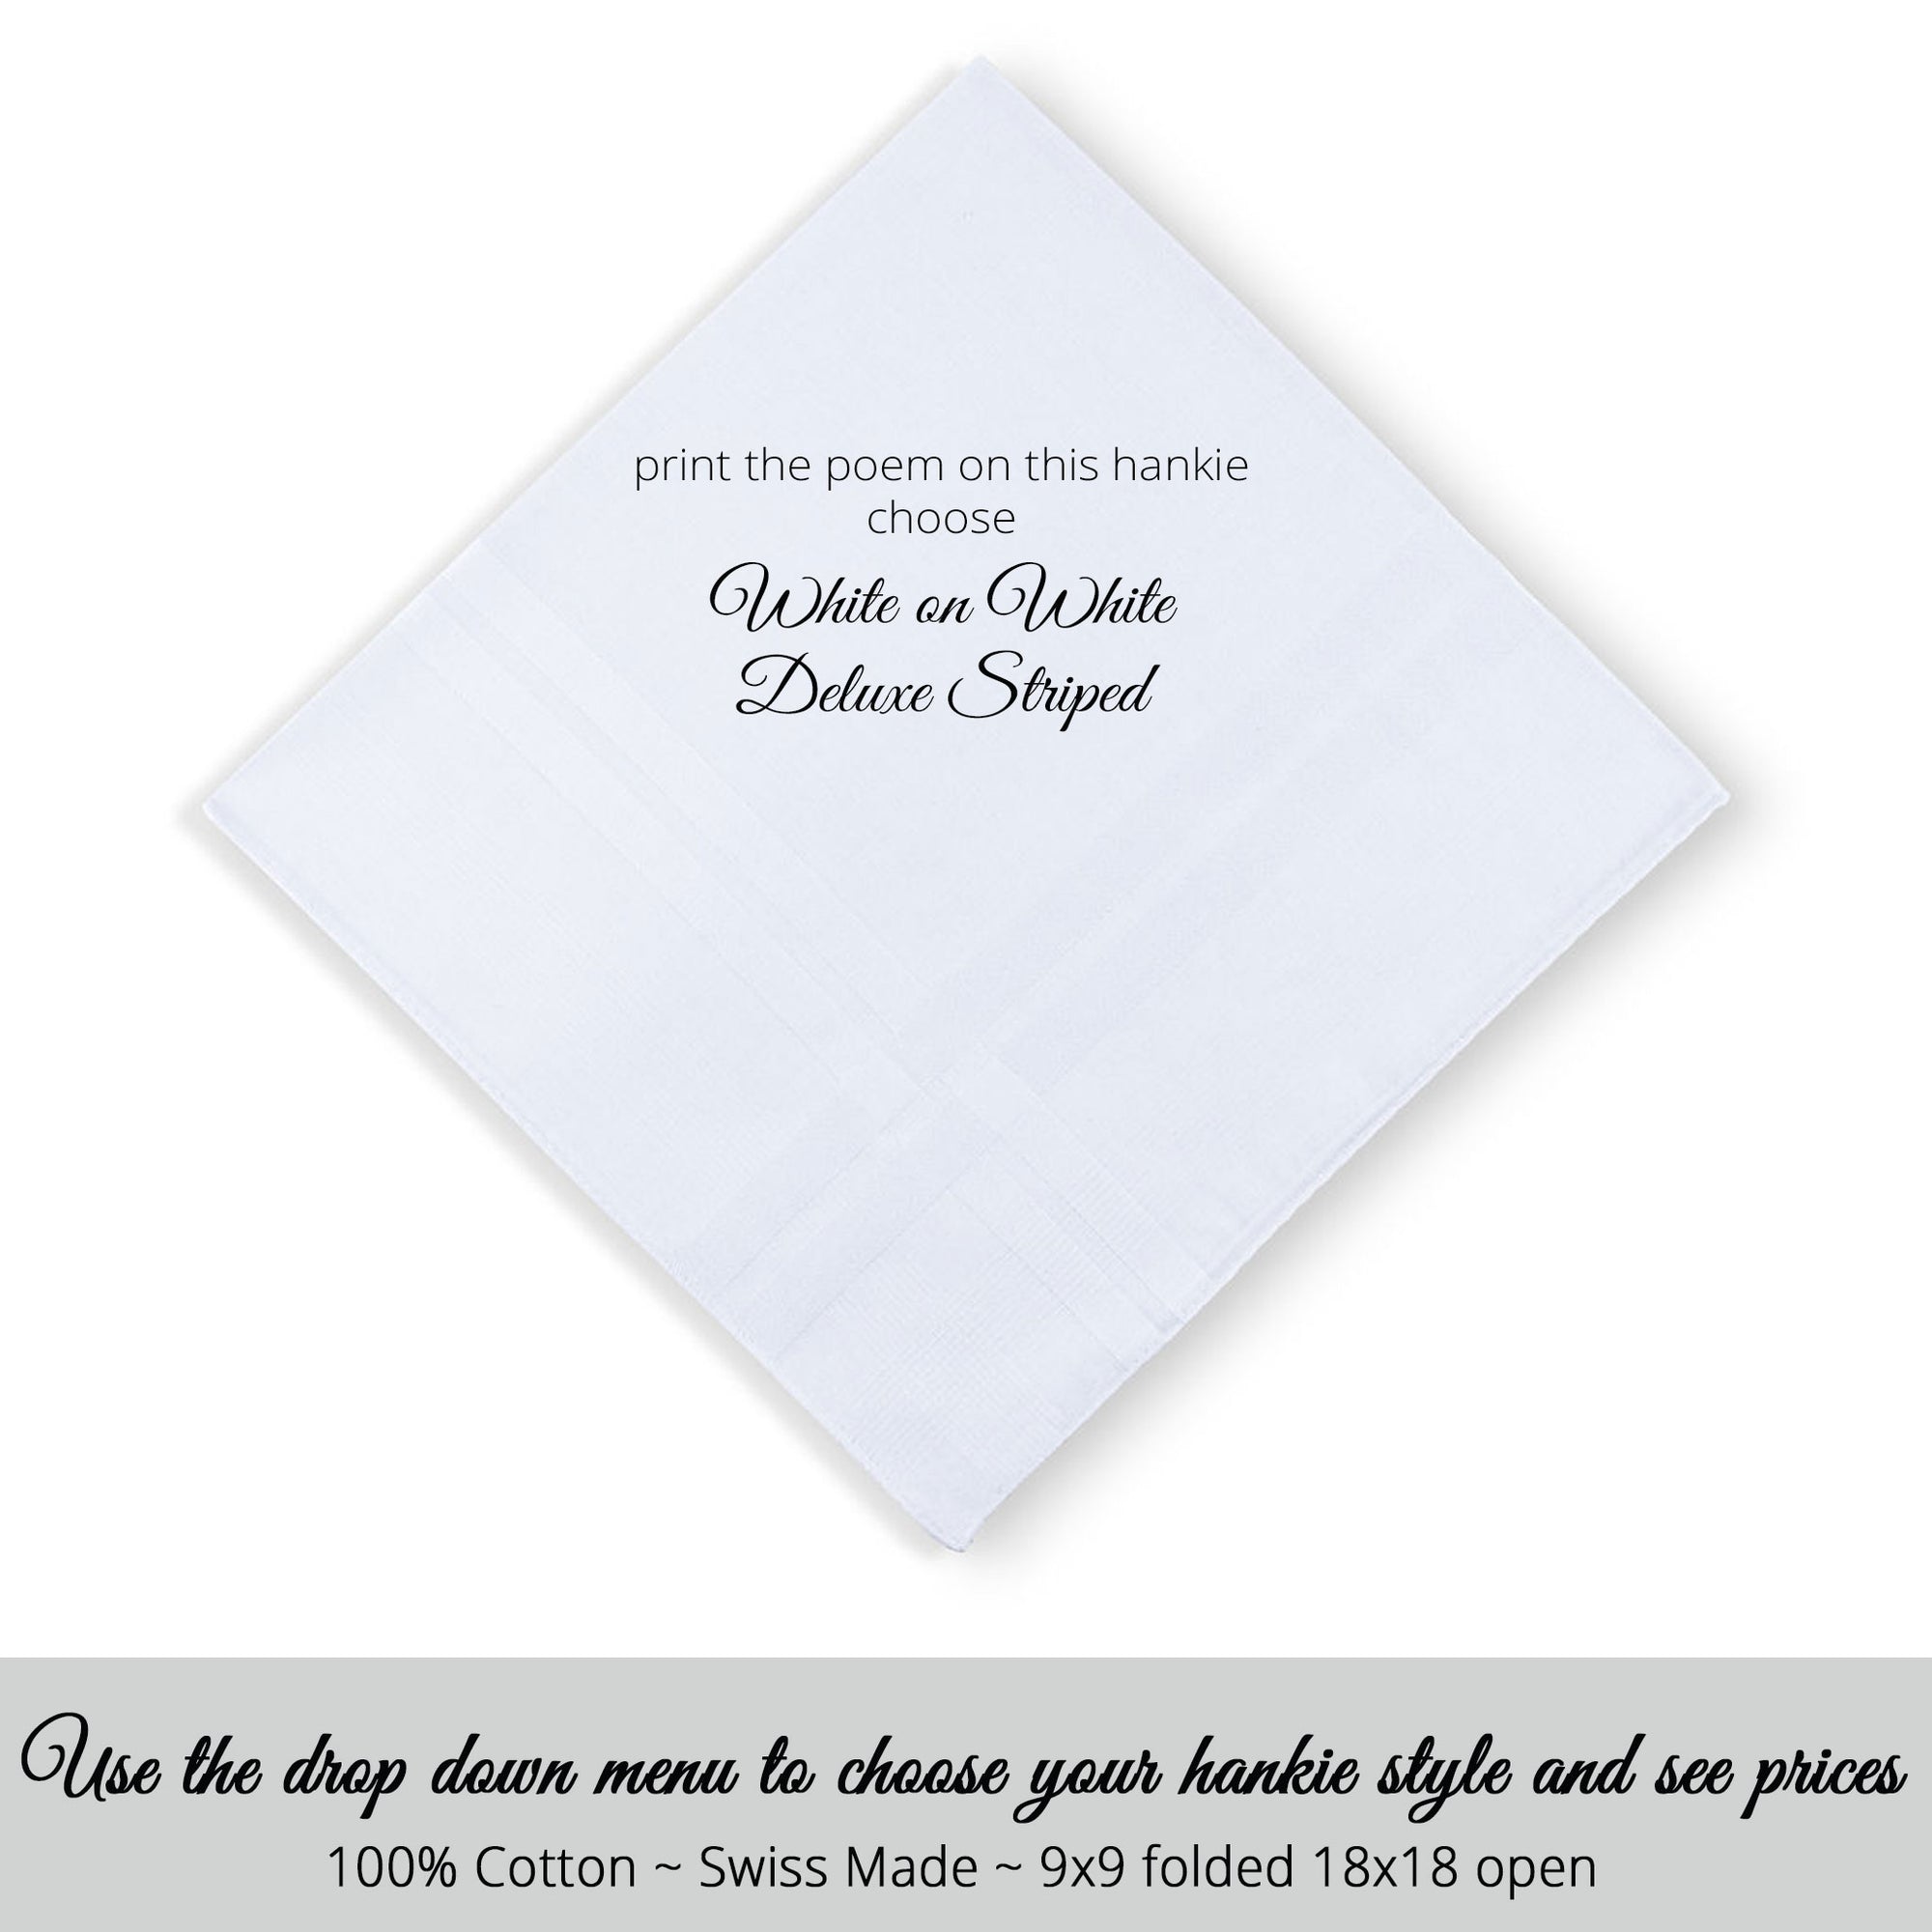 Gay Wedding Masculine Hankie style Swiss made white on white deluxe striped for the Bride poem printed hankie